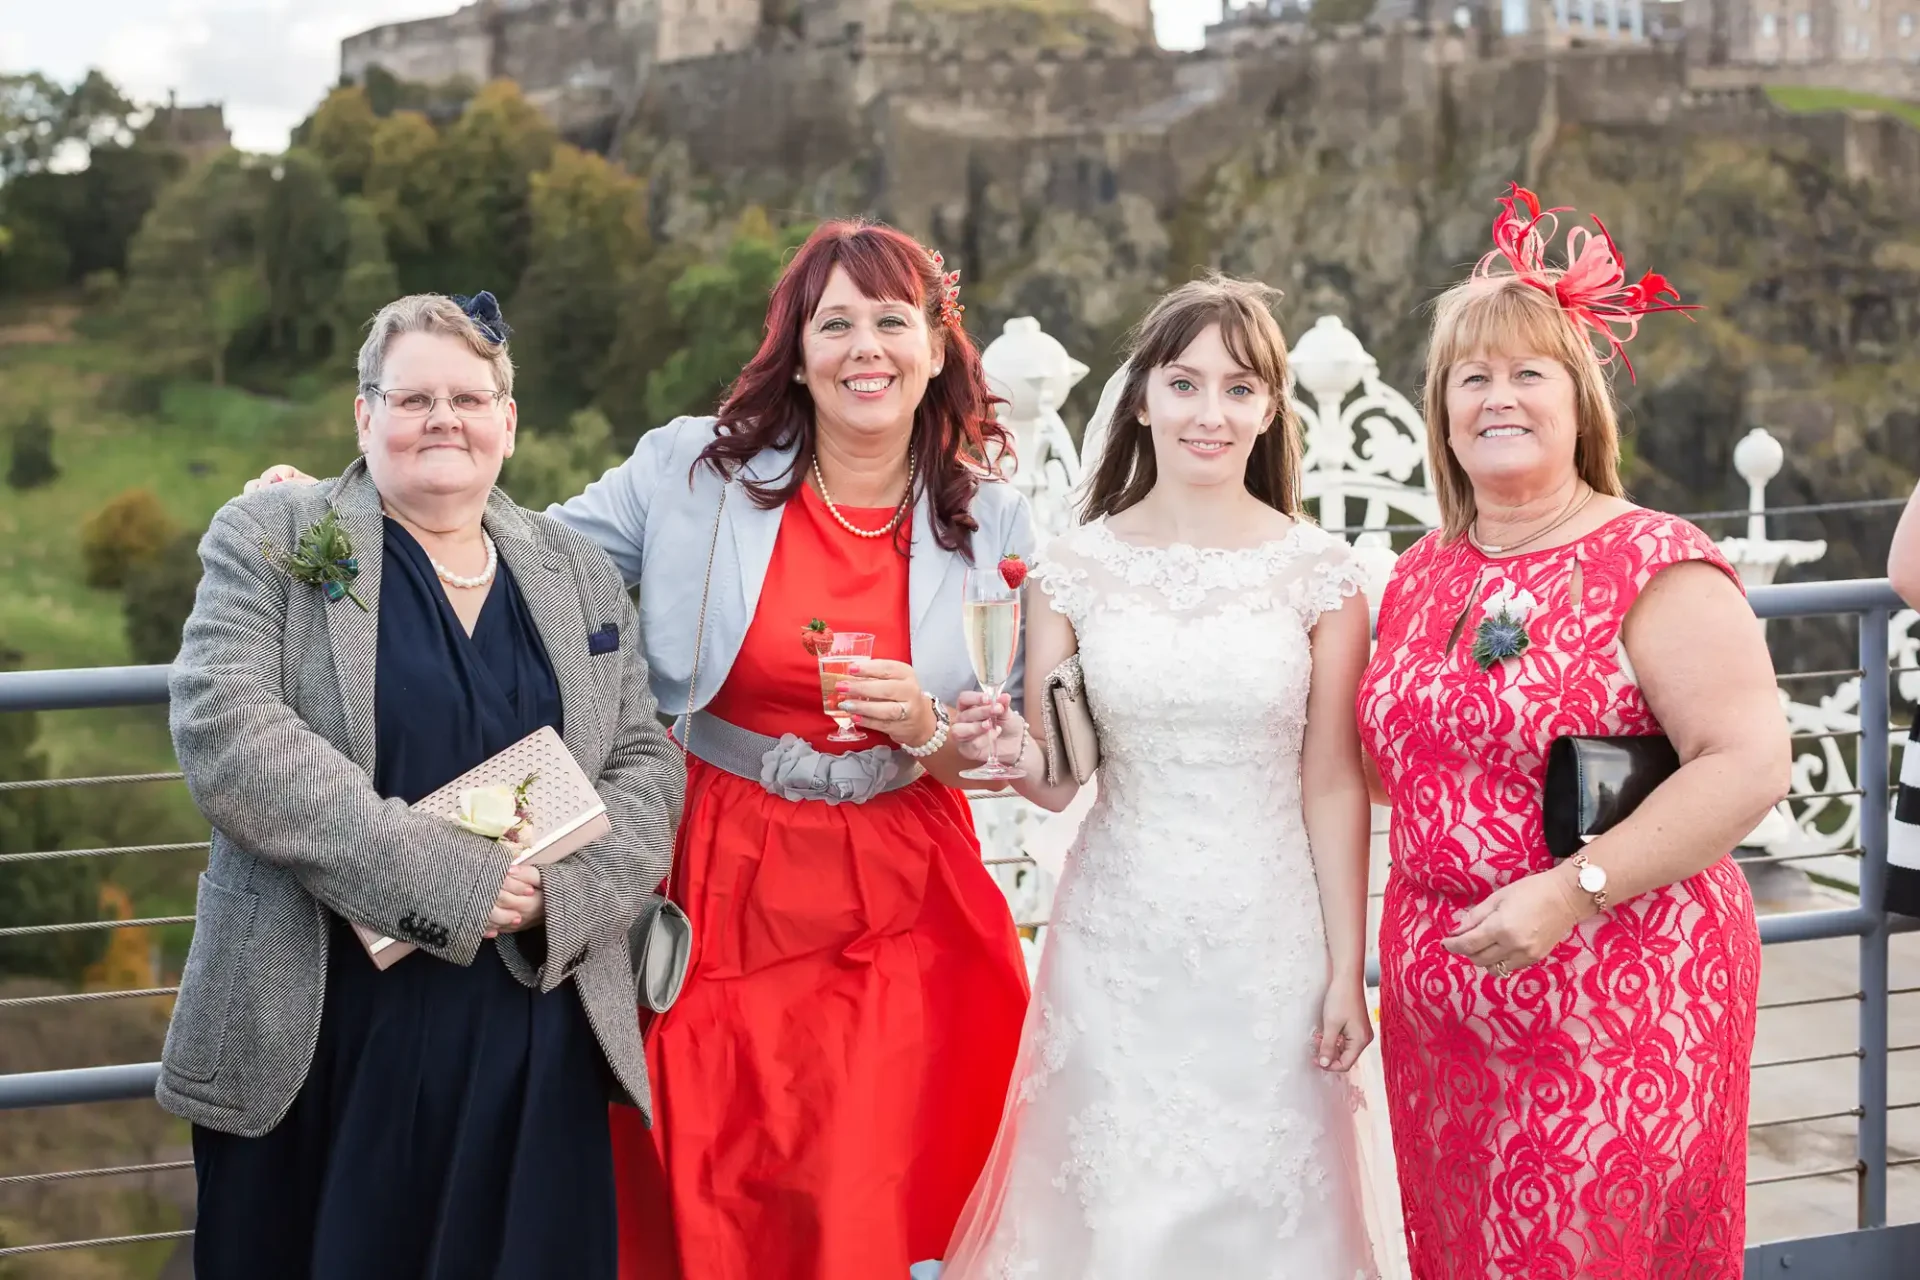 Four women in formal attire pose for a photo outdoors, with a castle in the background. the woman in a white bridal gown stands center, flanked by three others wearing colorful dresses.